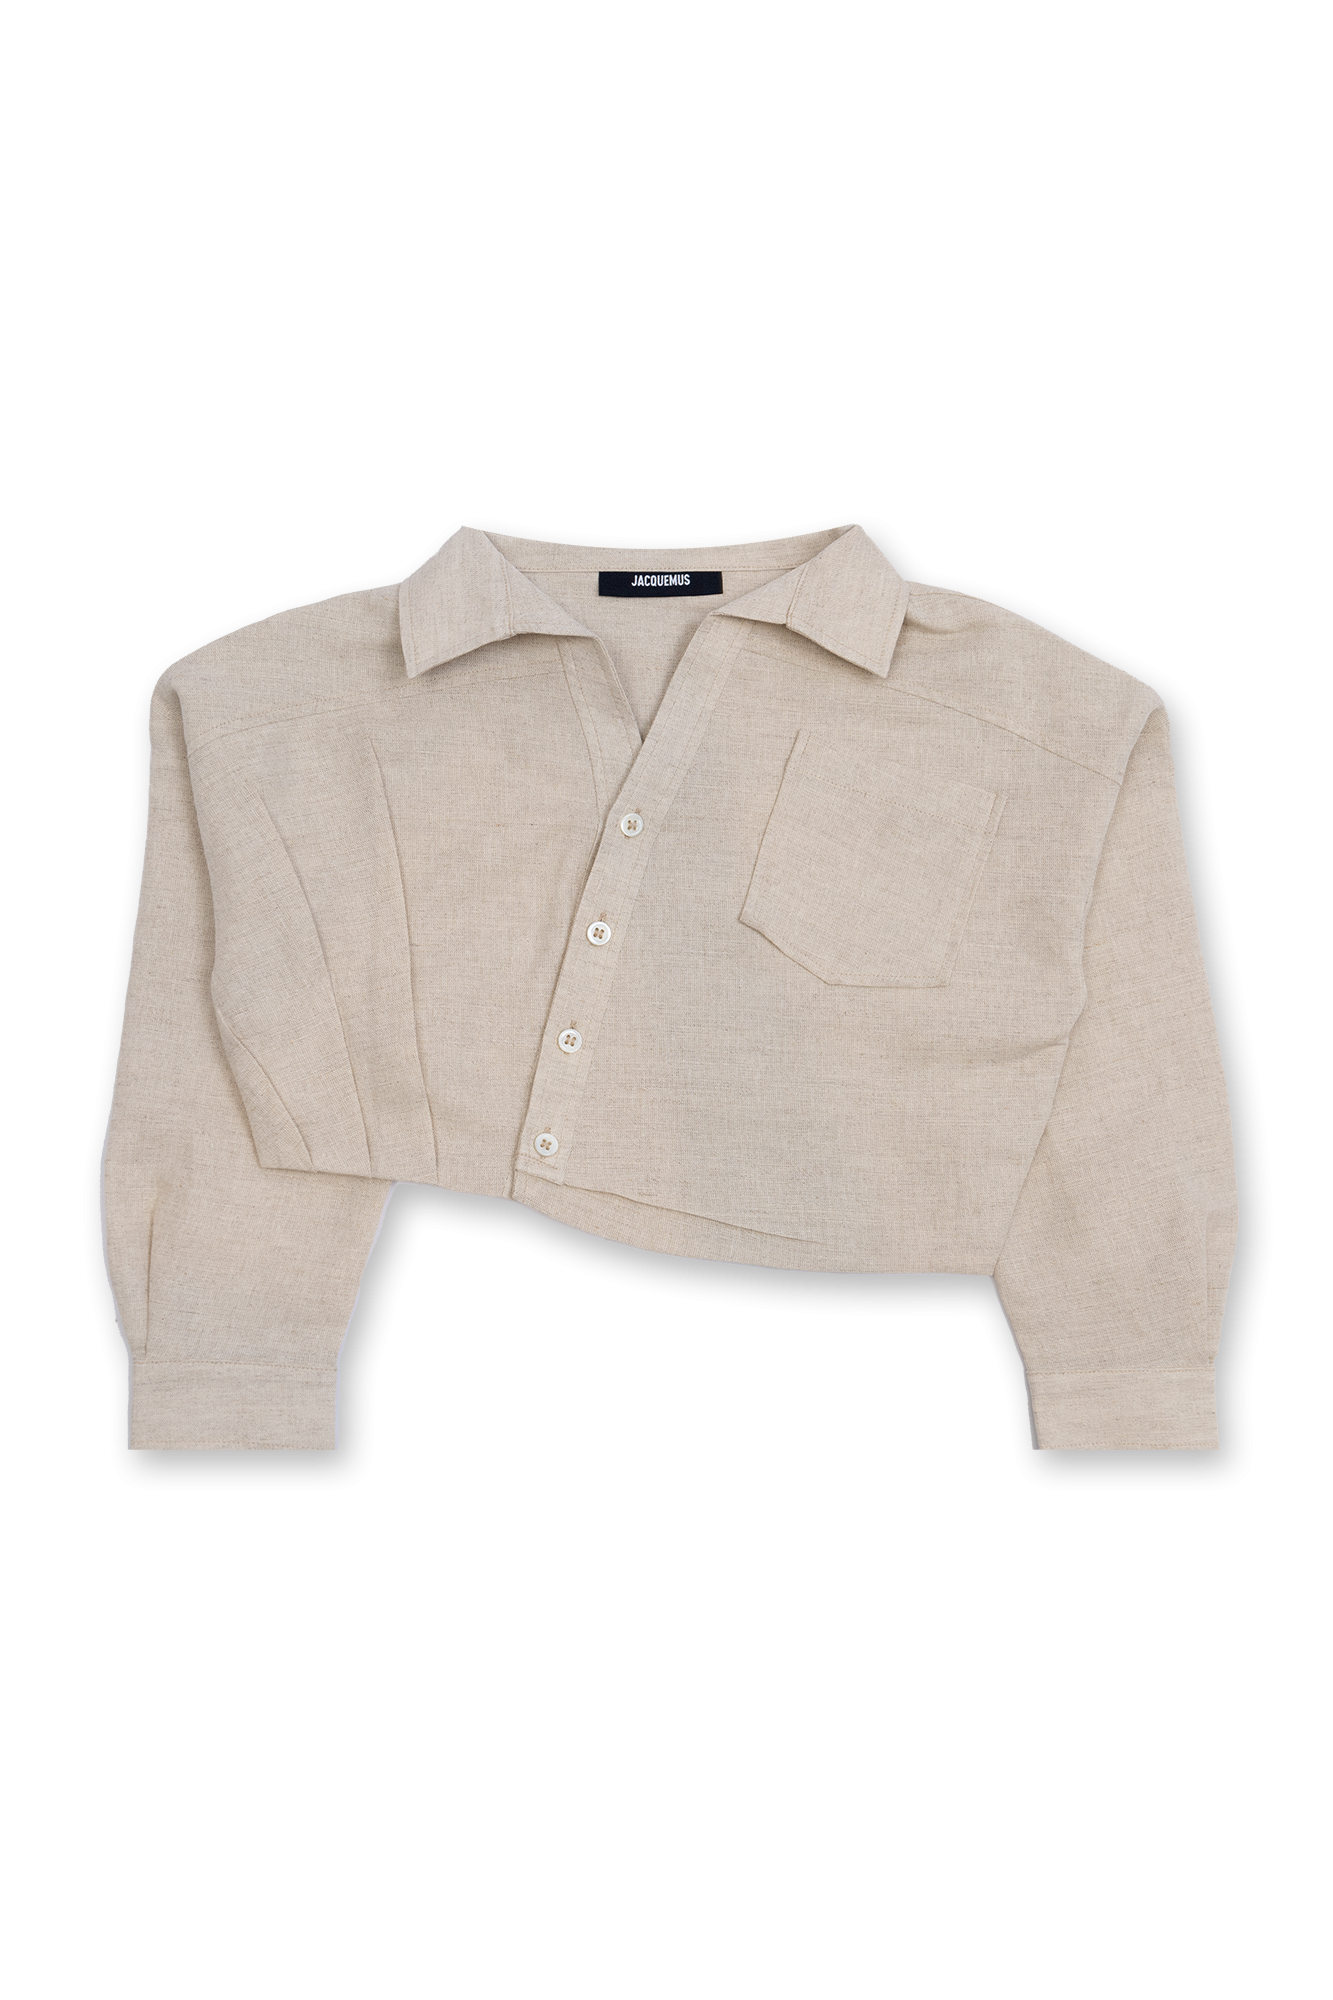 Our Legacy Splash 1950s levis Shirt - Cream keeping up with